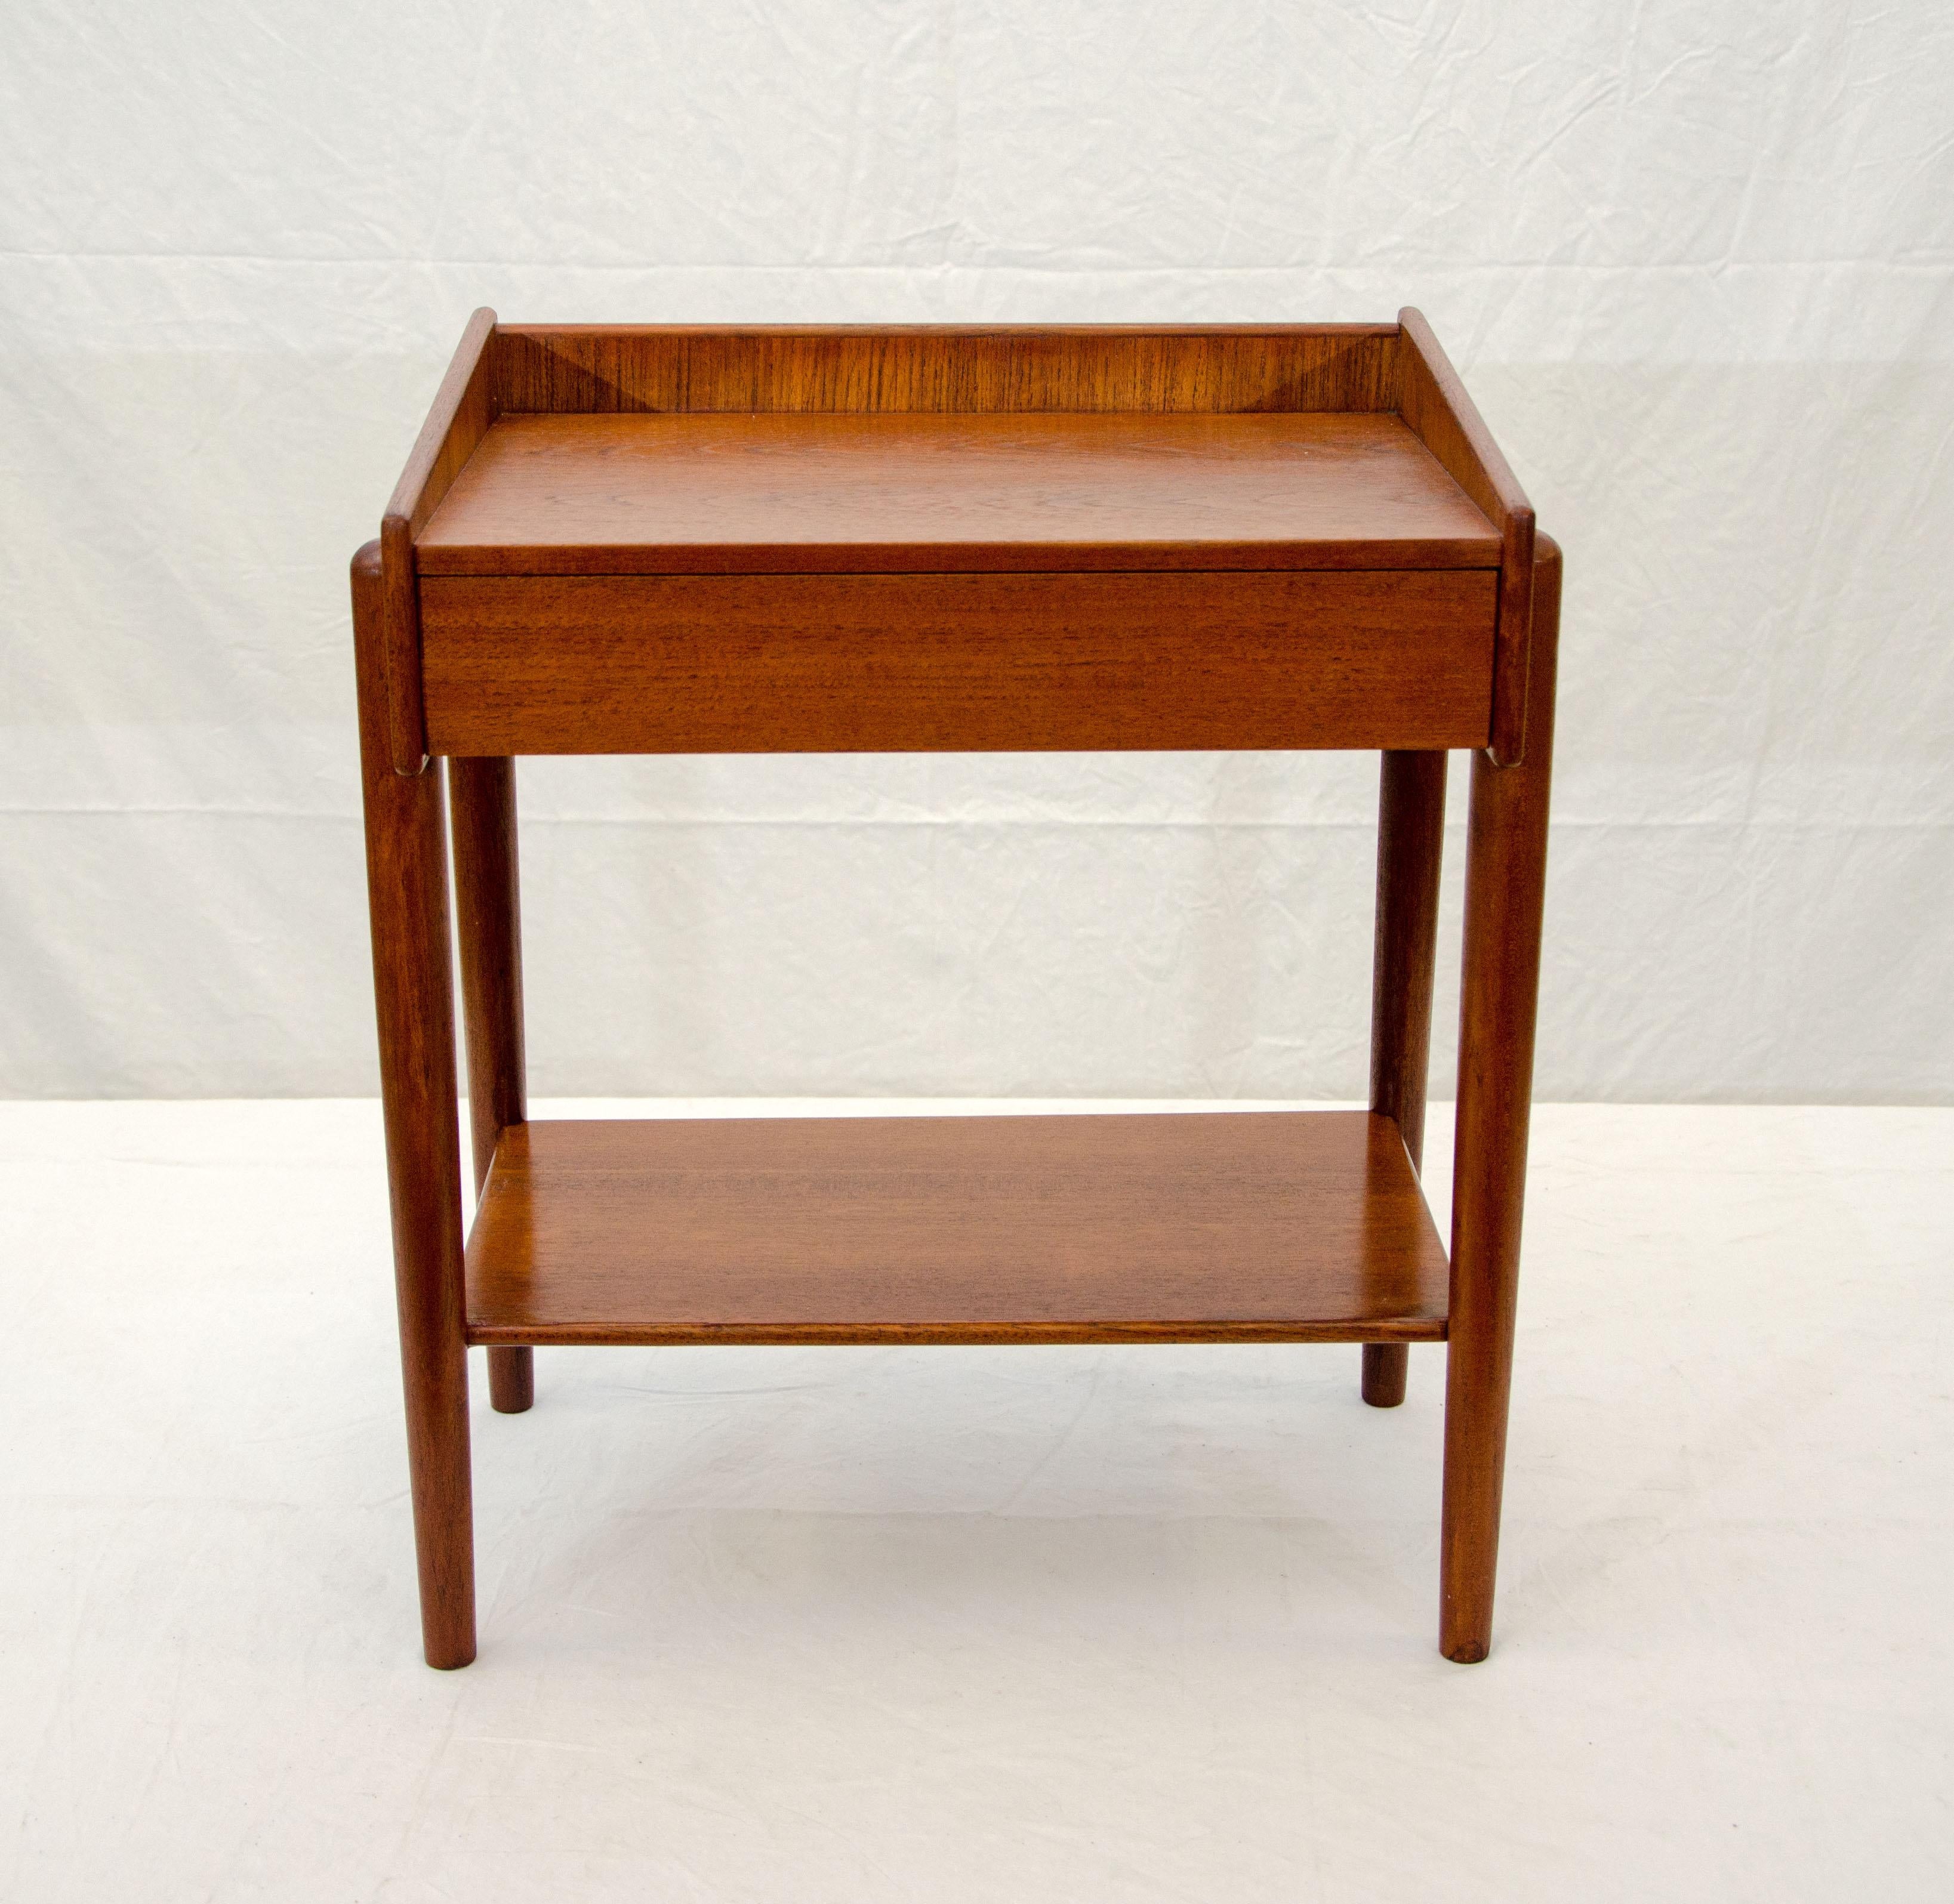 Nice small nightstand or end table with one storage drawer and a shelf on round tapered legs. The sides of the cabinet taper to a taller gallery at the back.